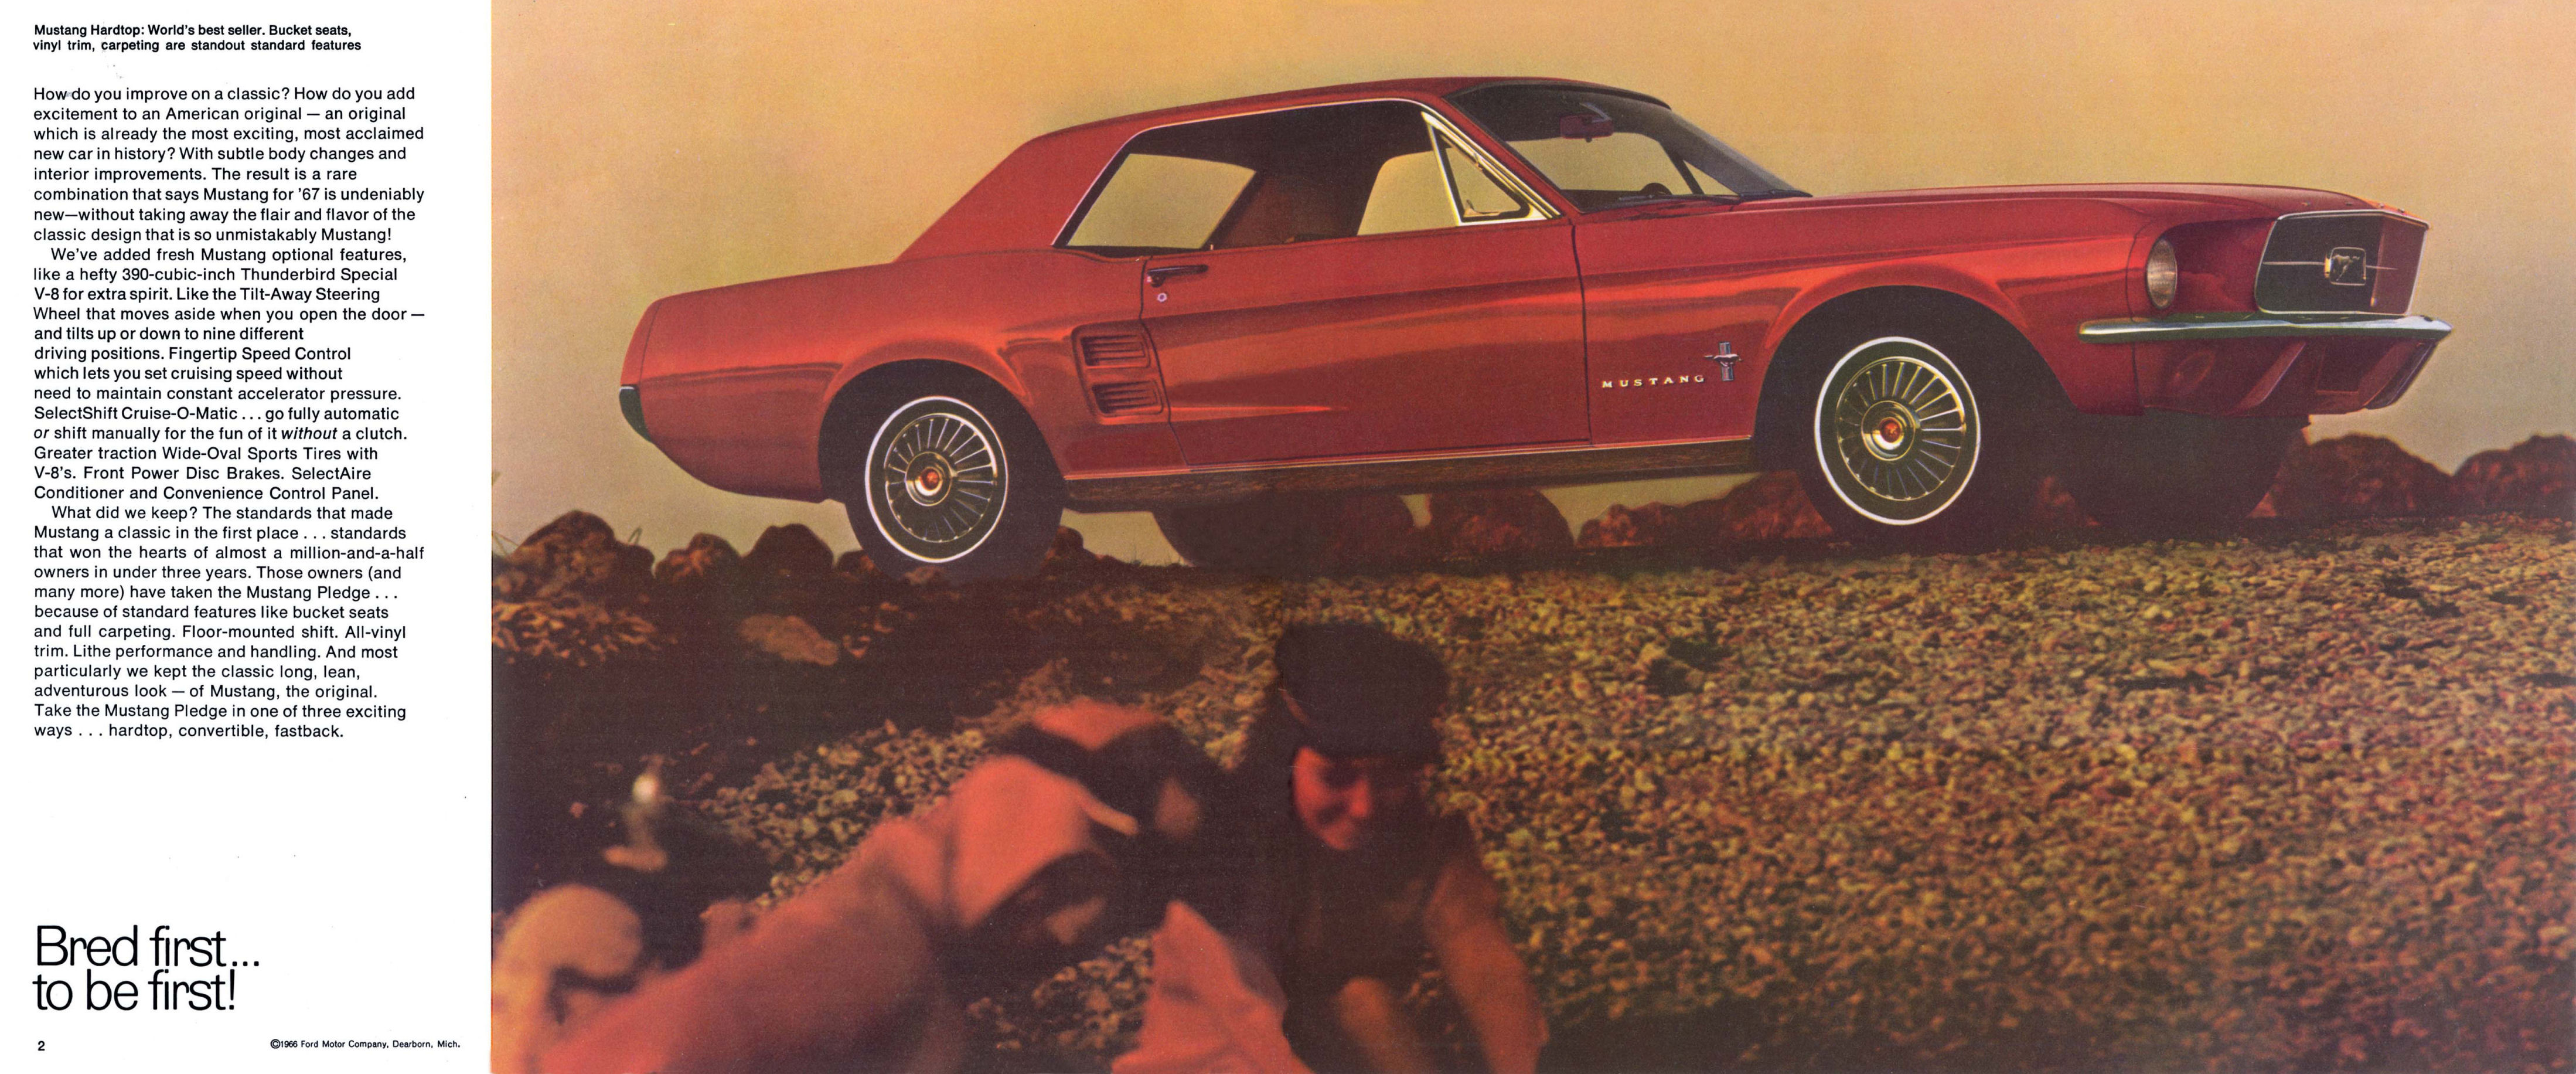 1967_Ford_Mustang-02-03